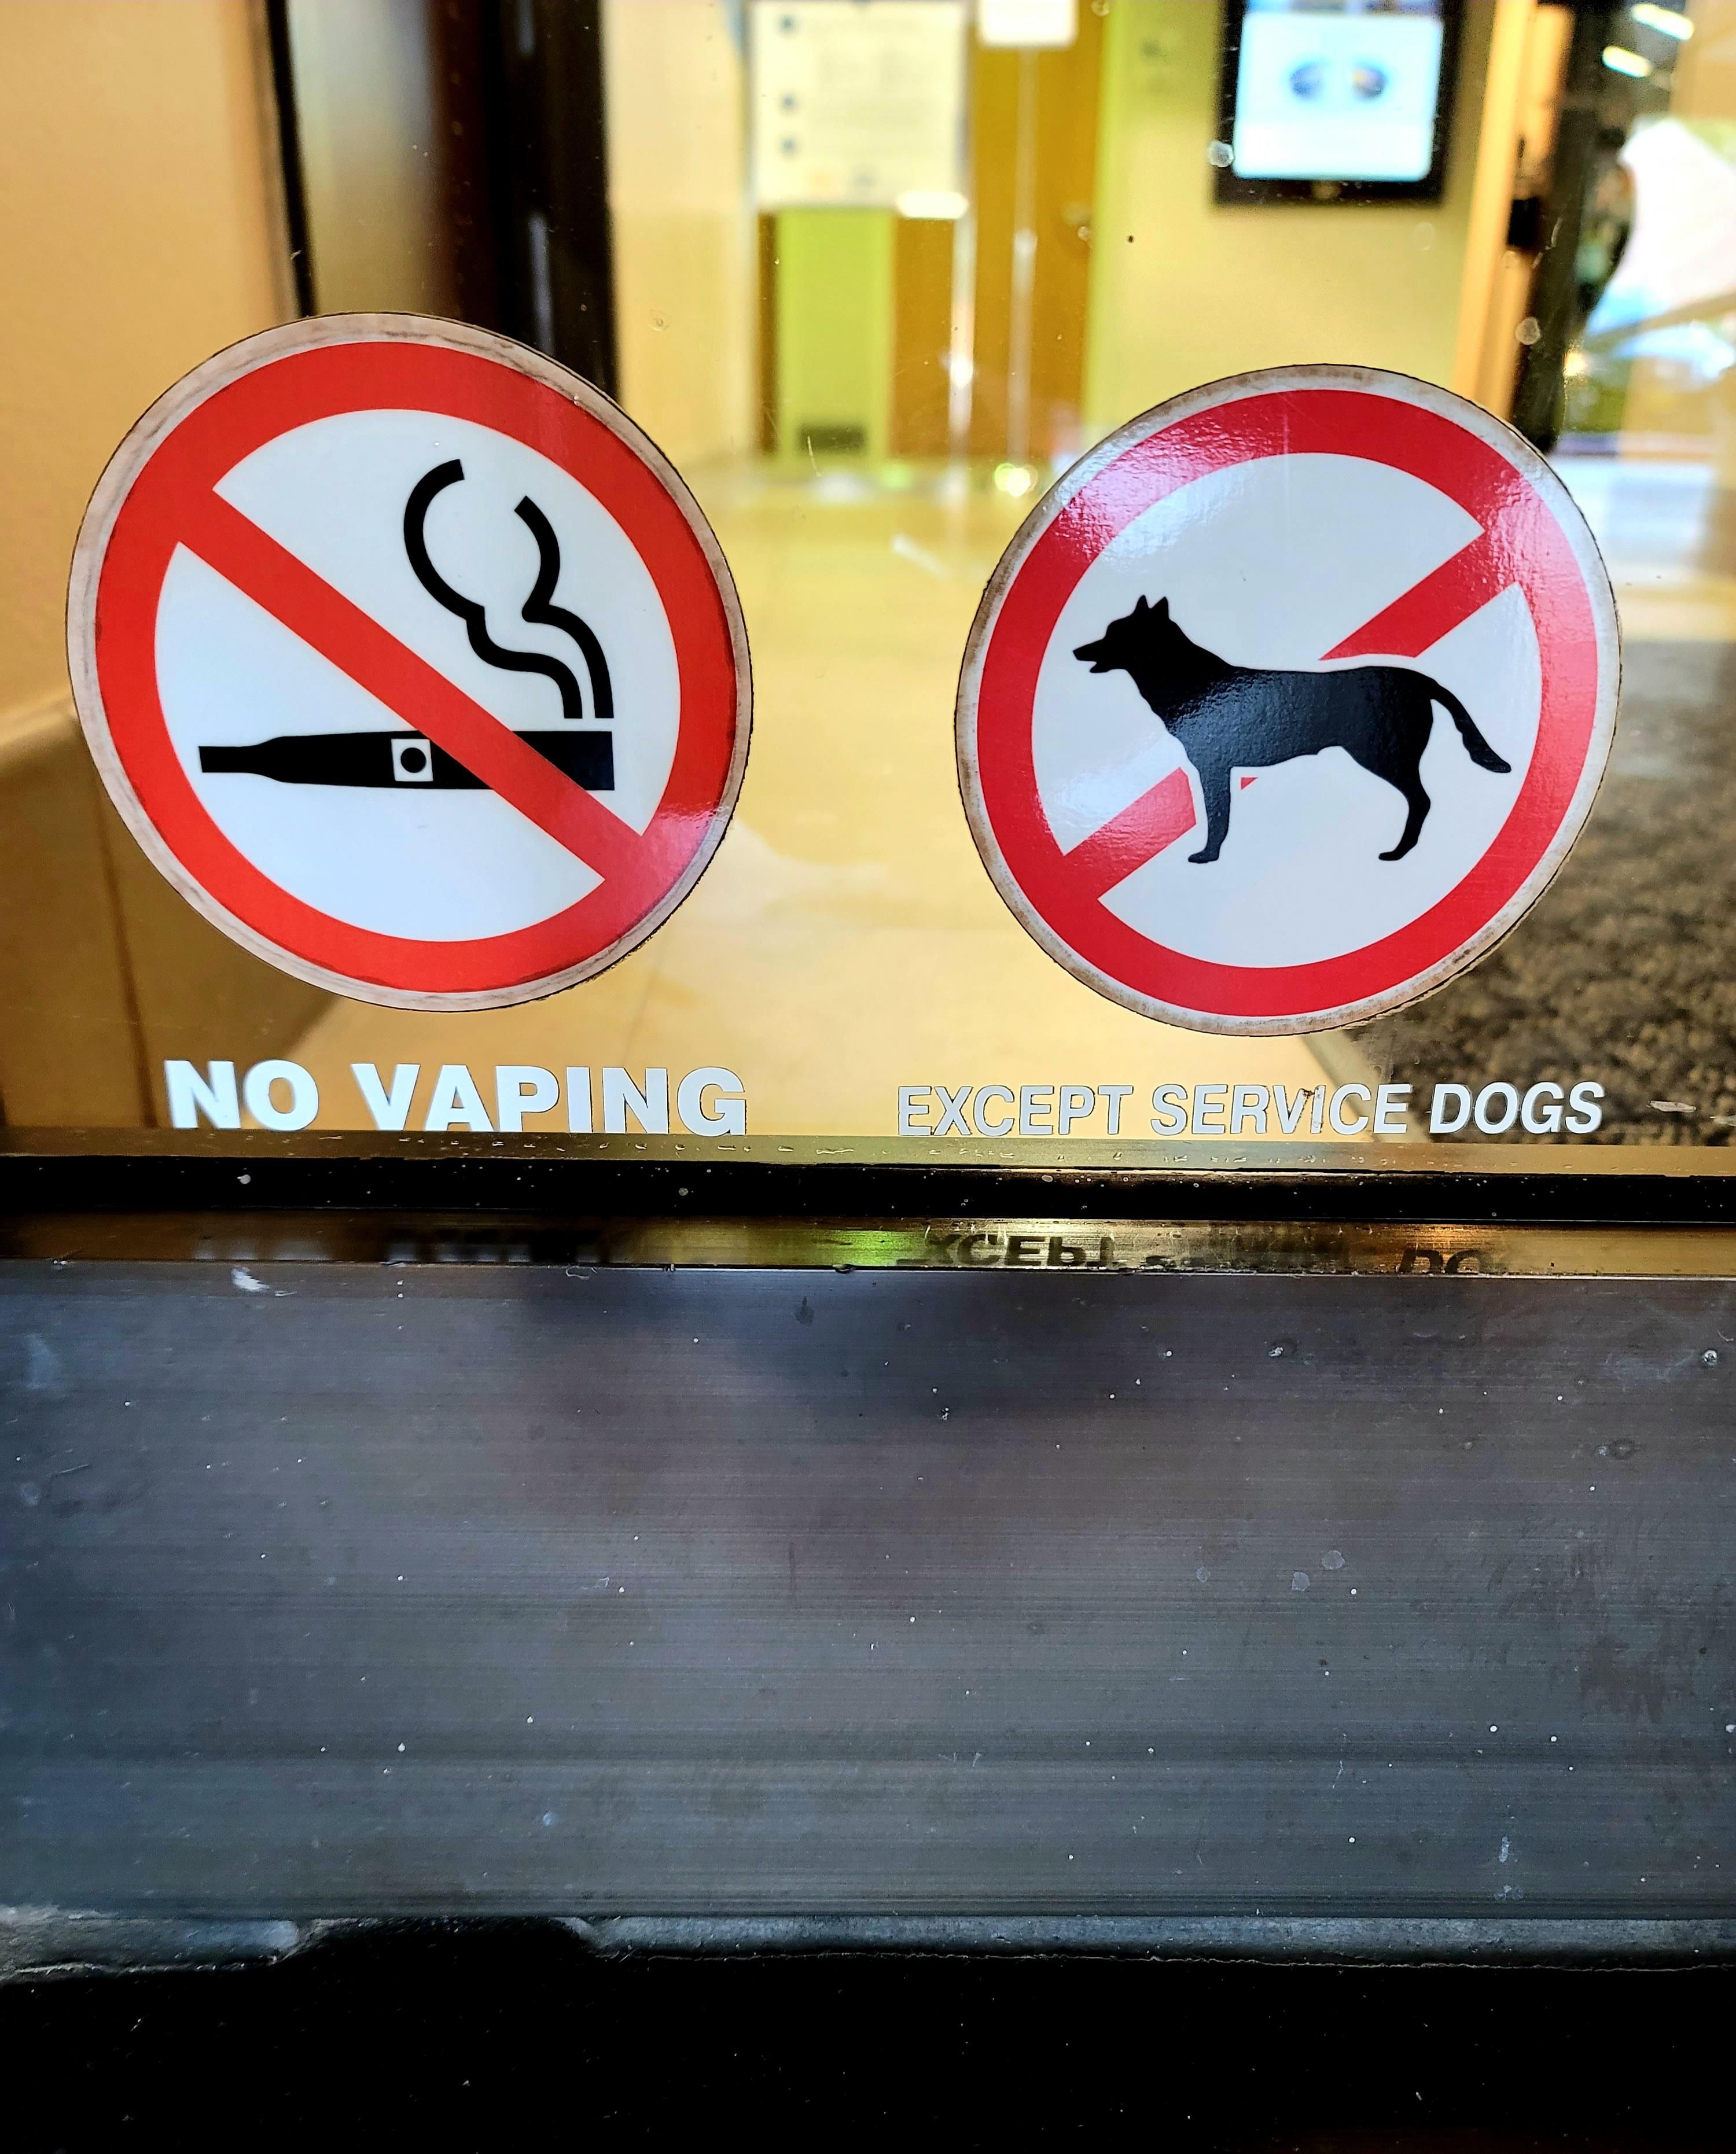 Apparently only Service Dogs are allowed to vape at my optometrists office